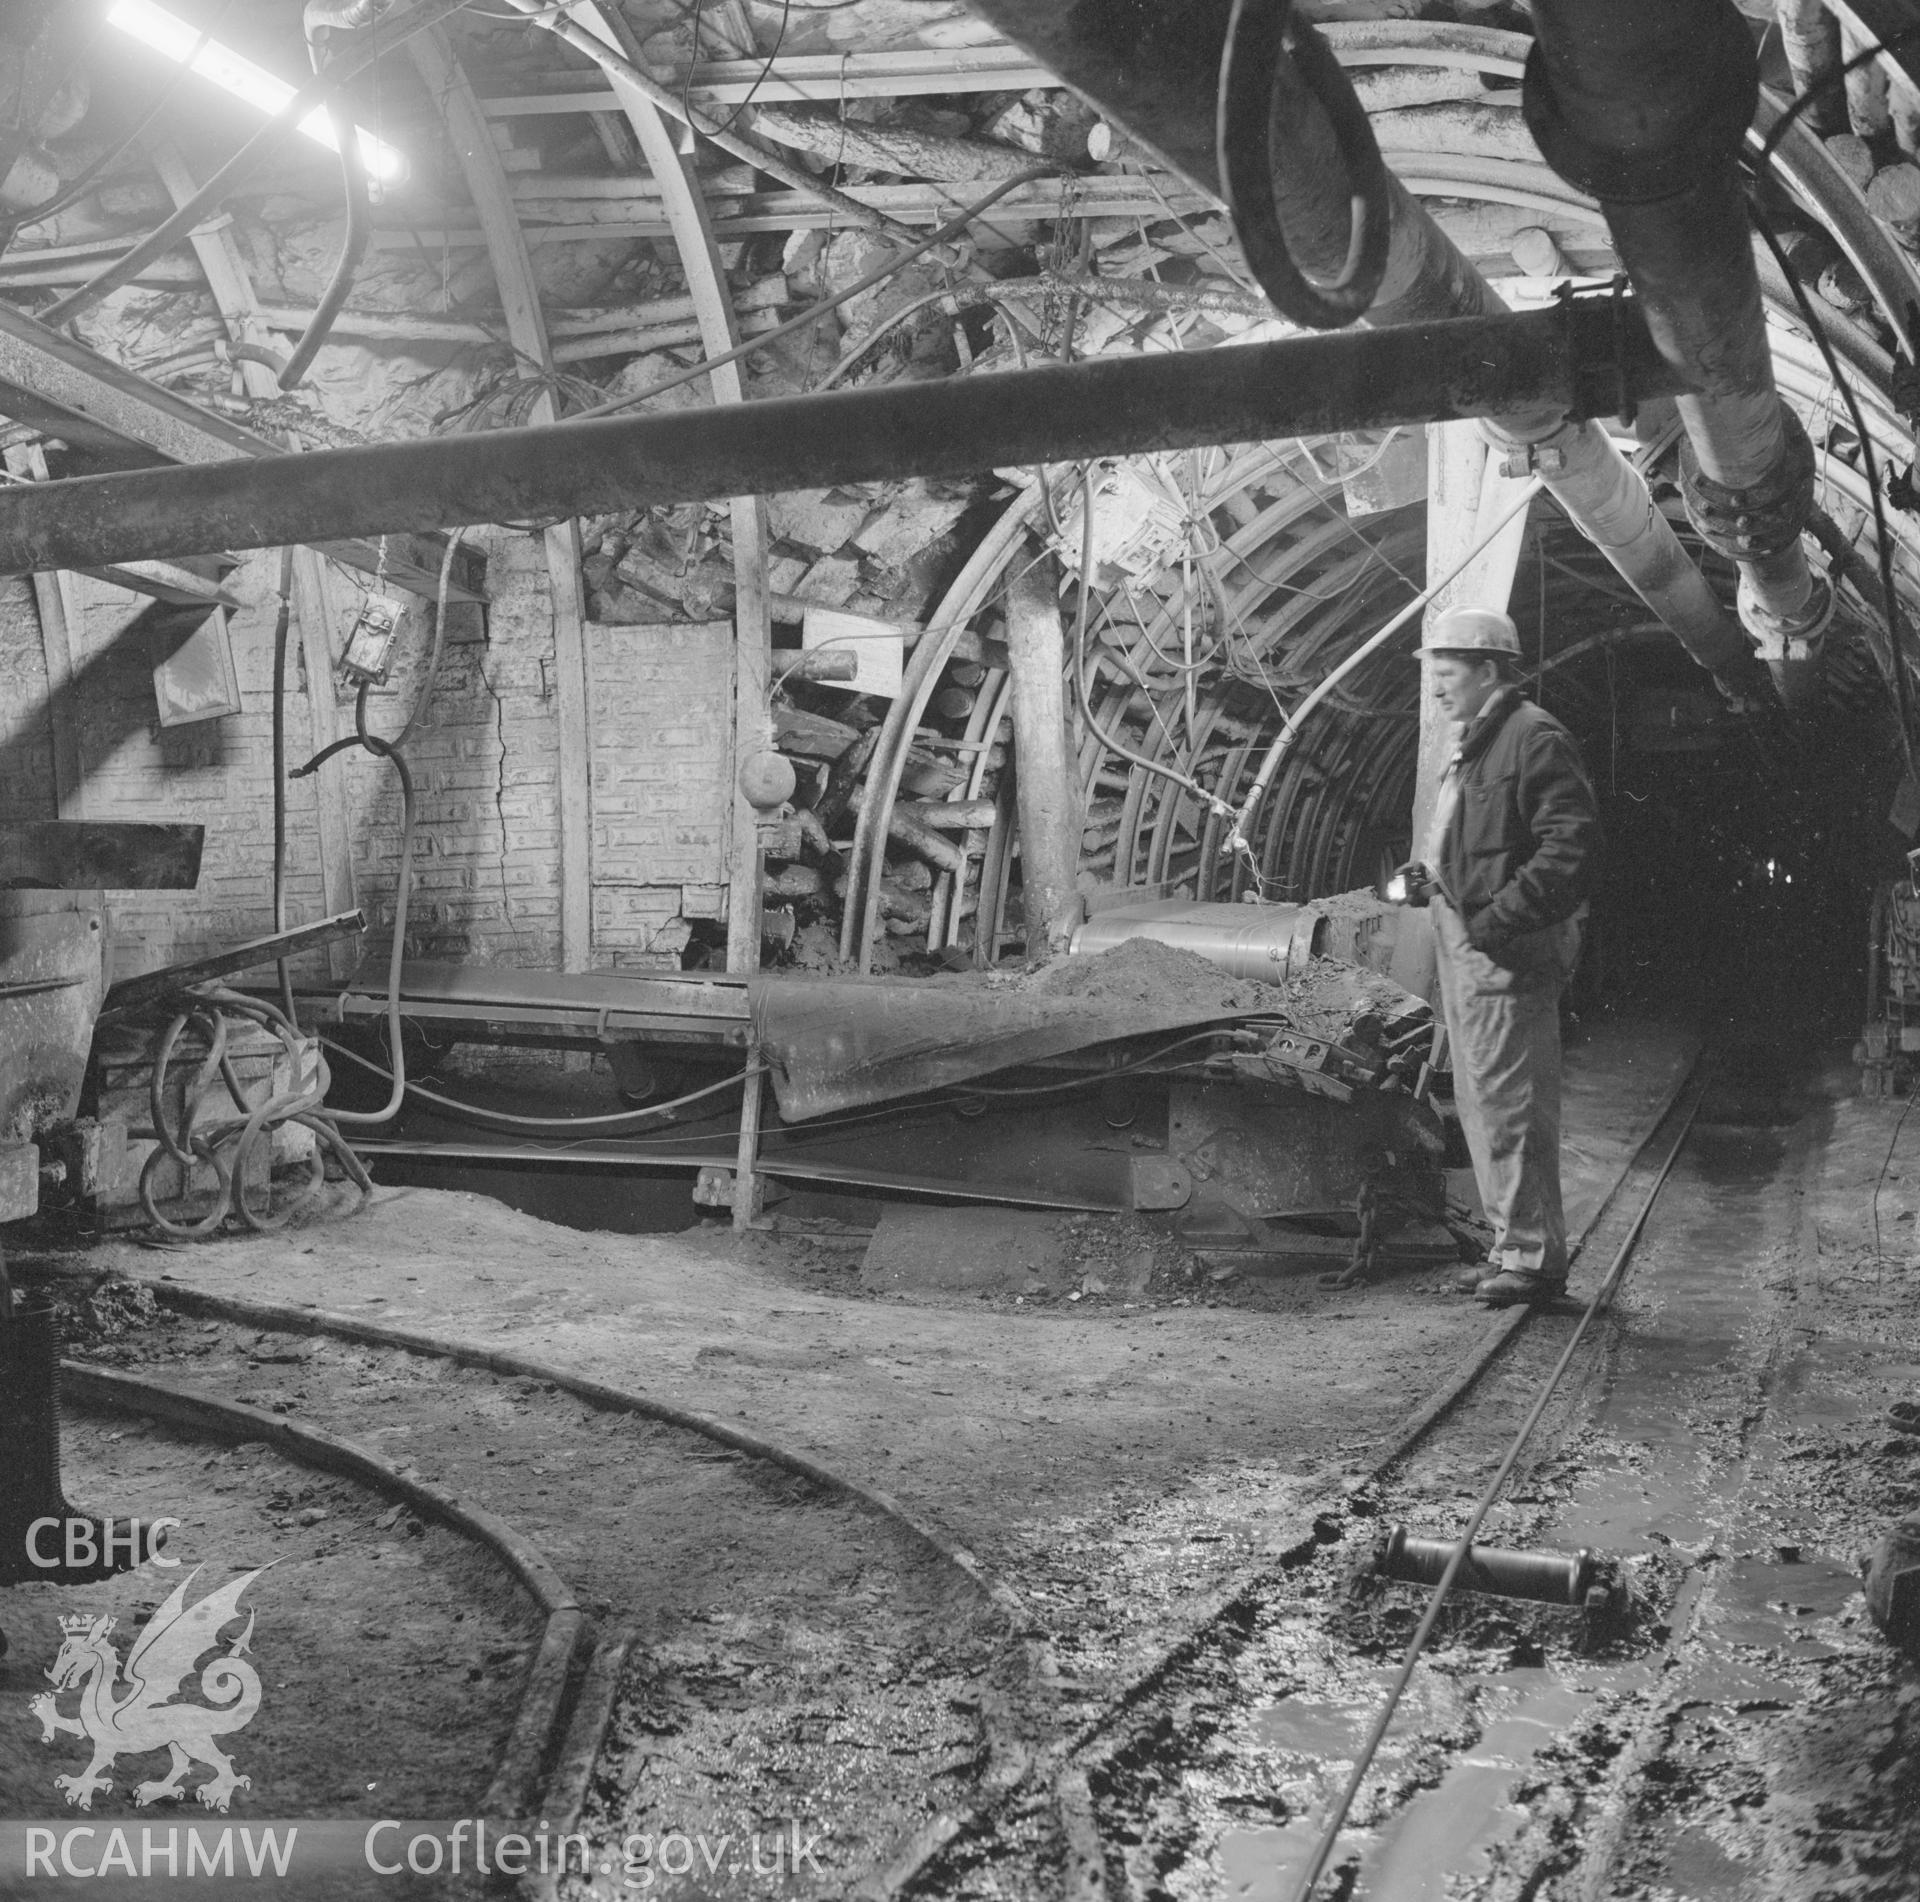 Digital copy of an acetate negative showing transfer point attendant with tram of supplies on haulage system at Marine Colliery, from the John Cornwell Collection.